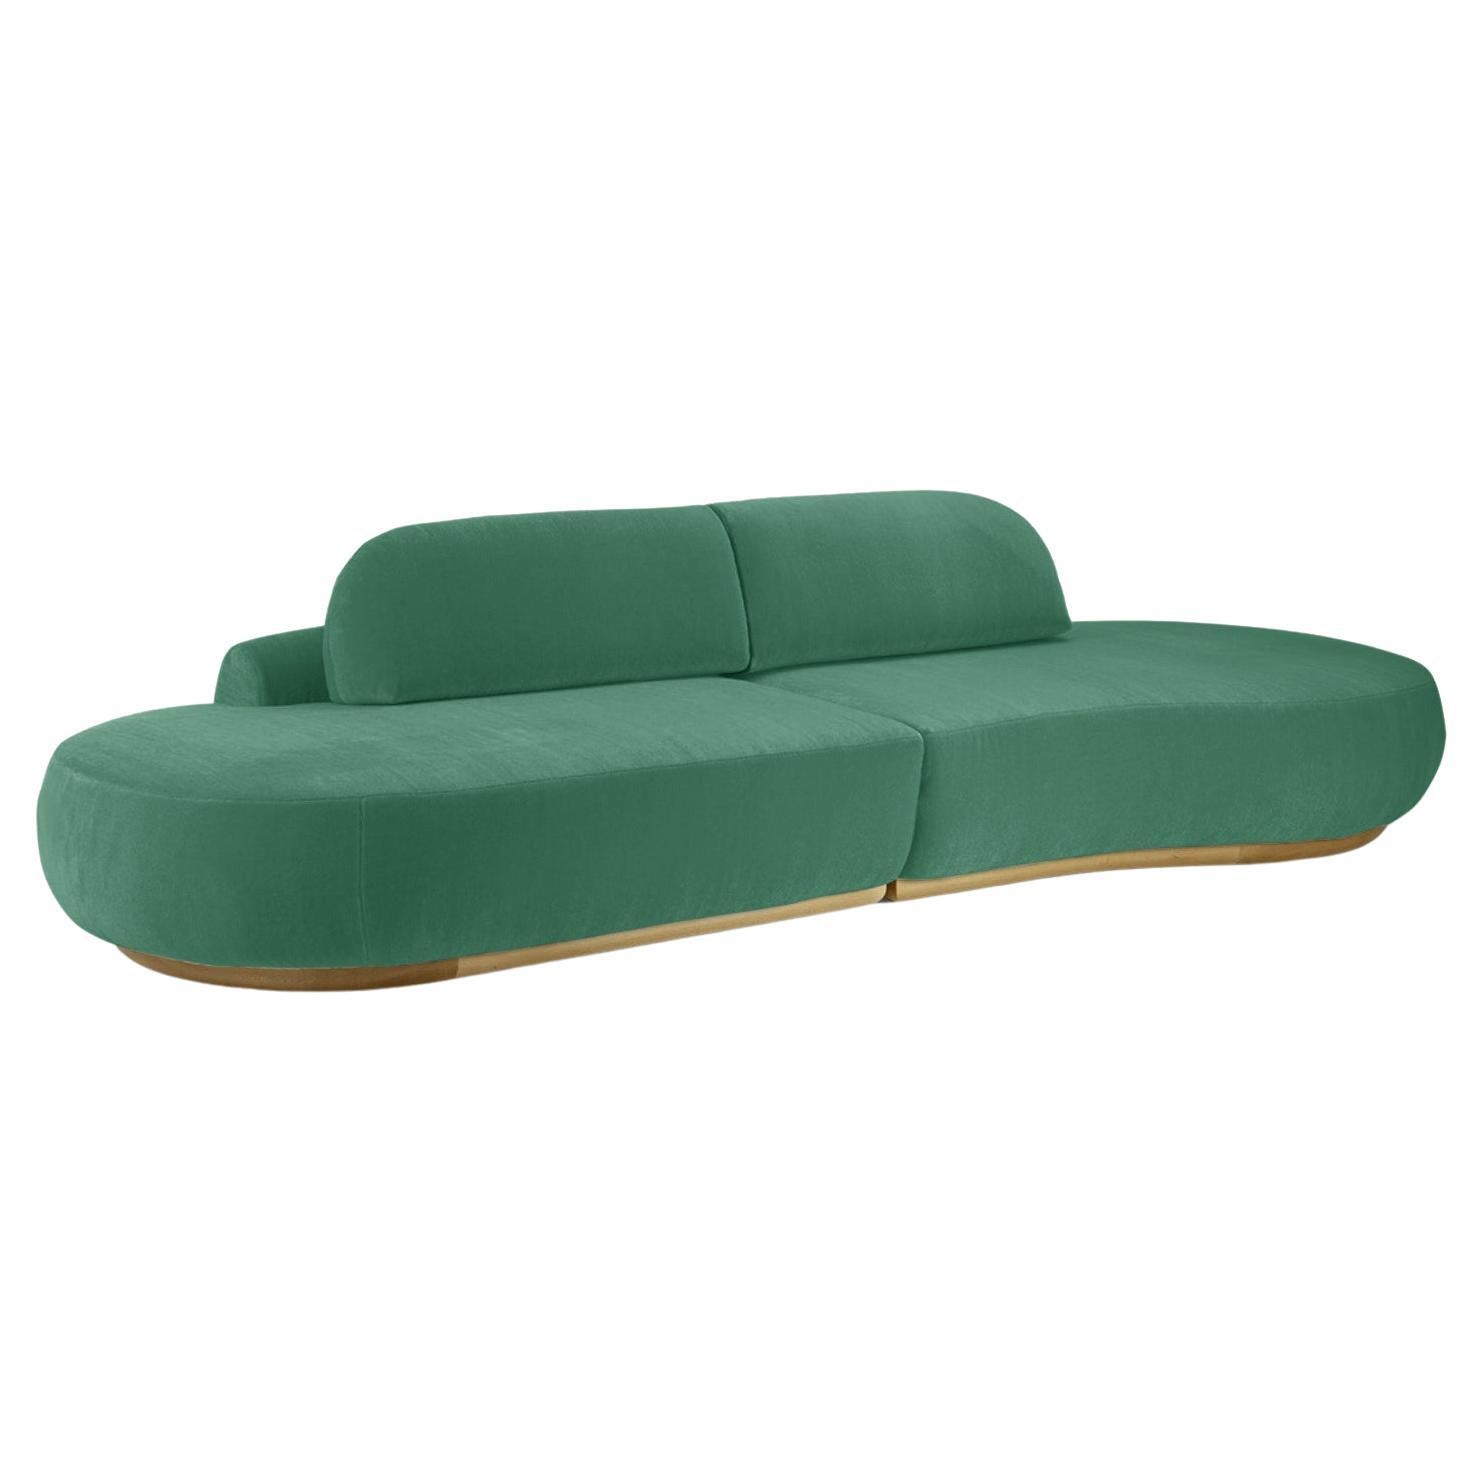 Naked Curved Sectional Sofa, 2 Piece with Natural Oak and Paris Green For Sale